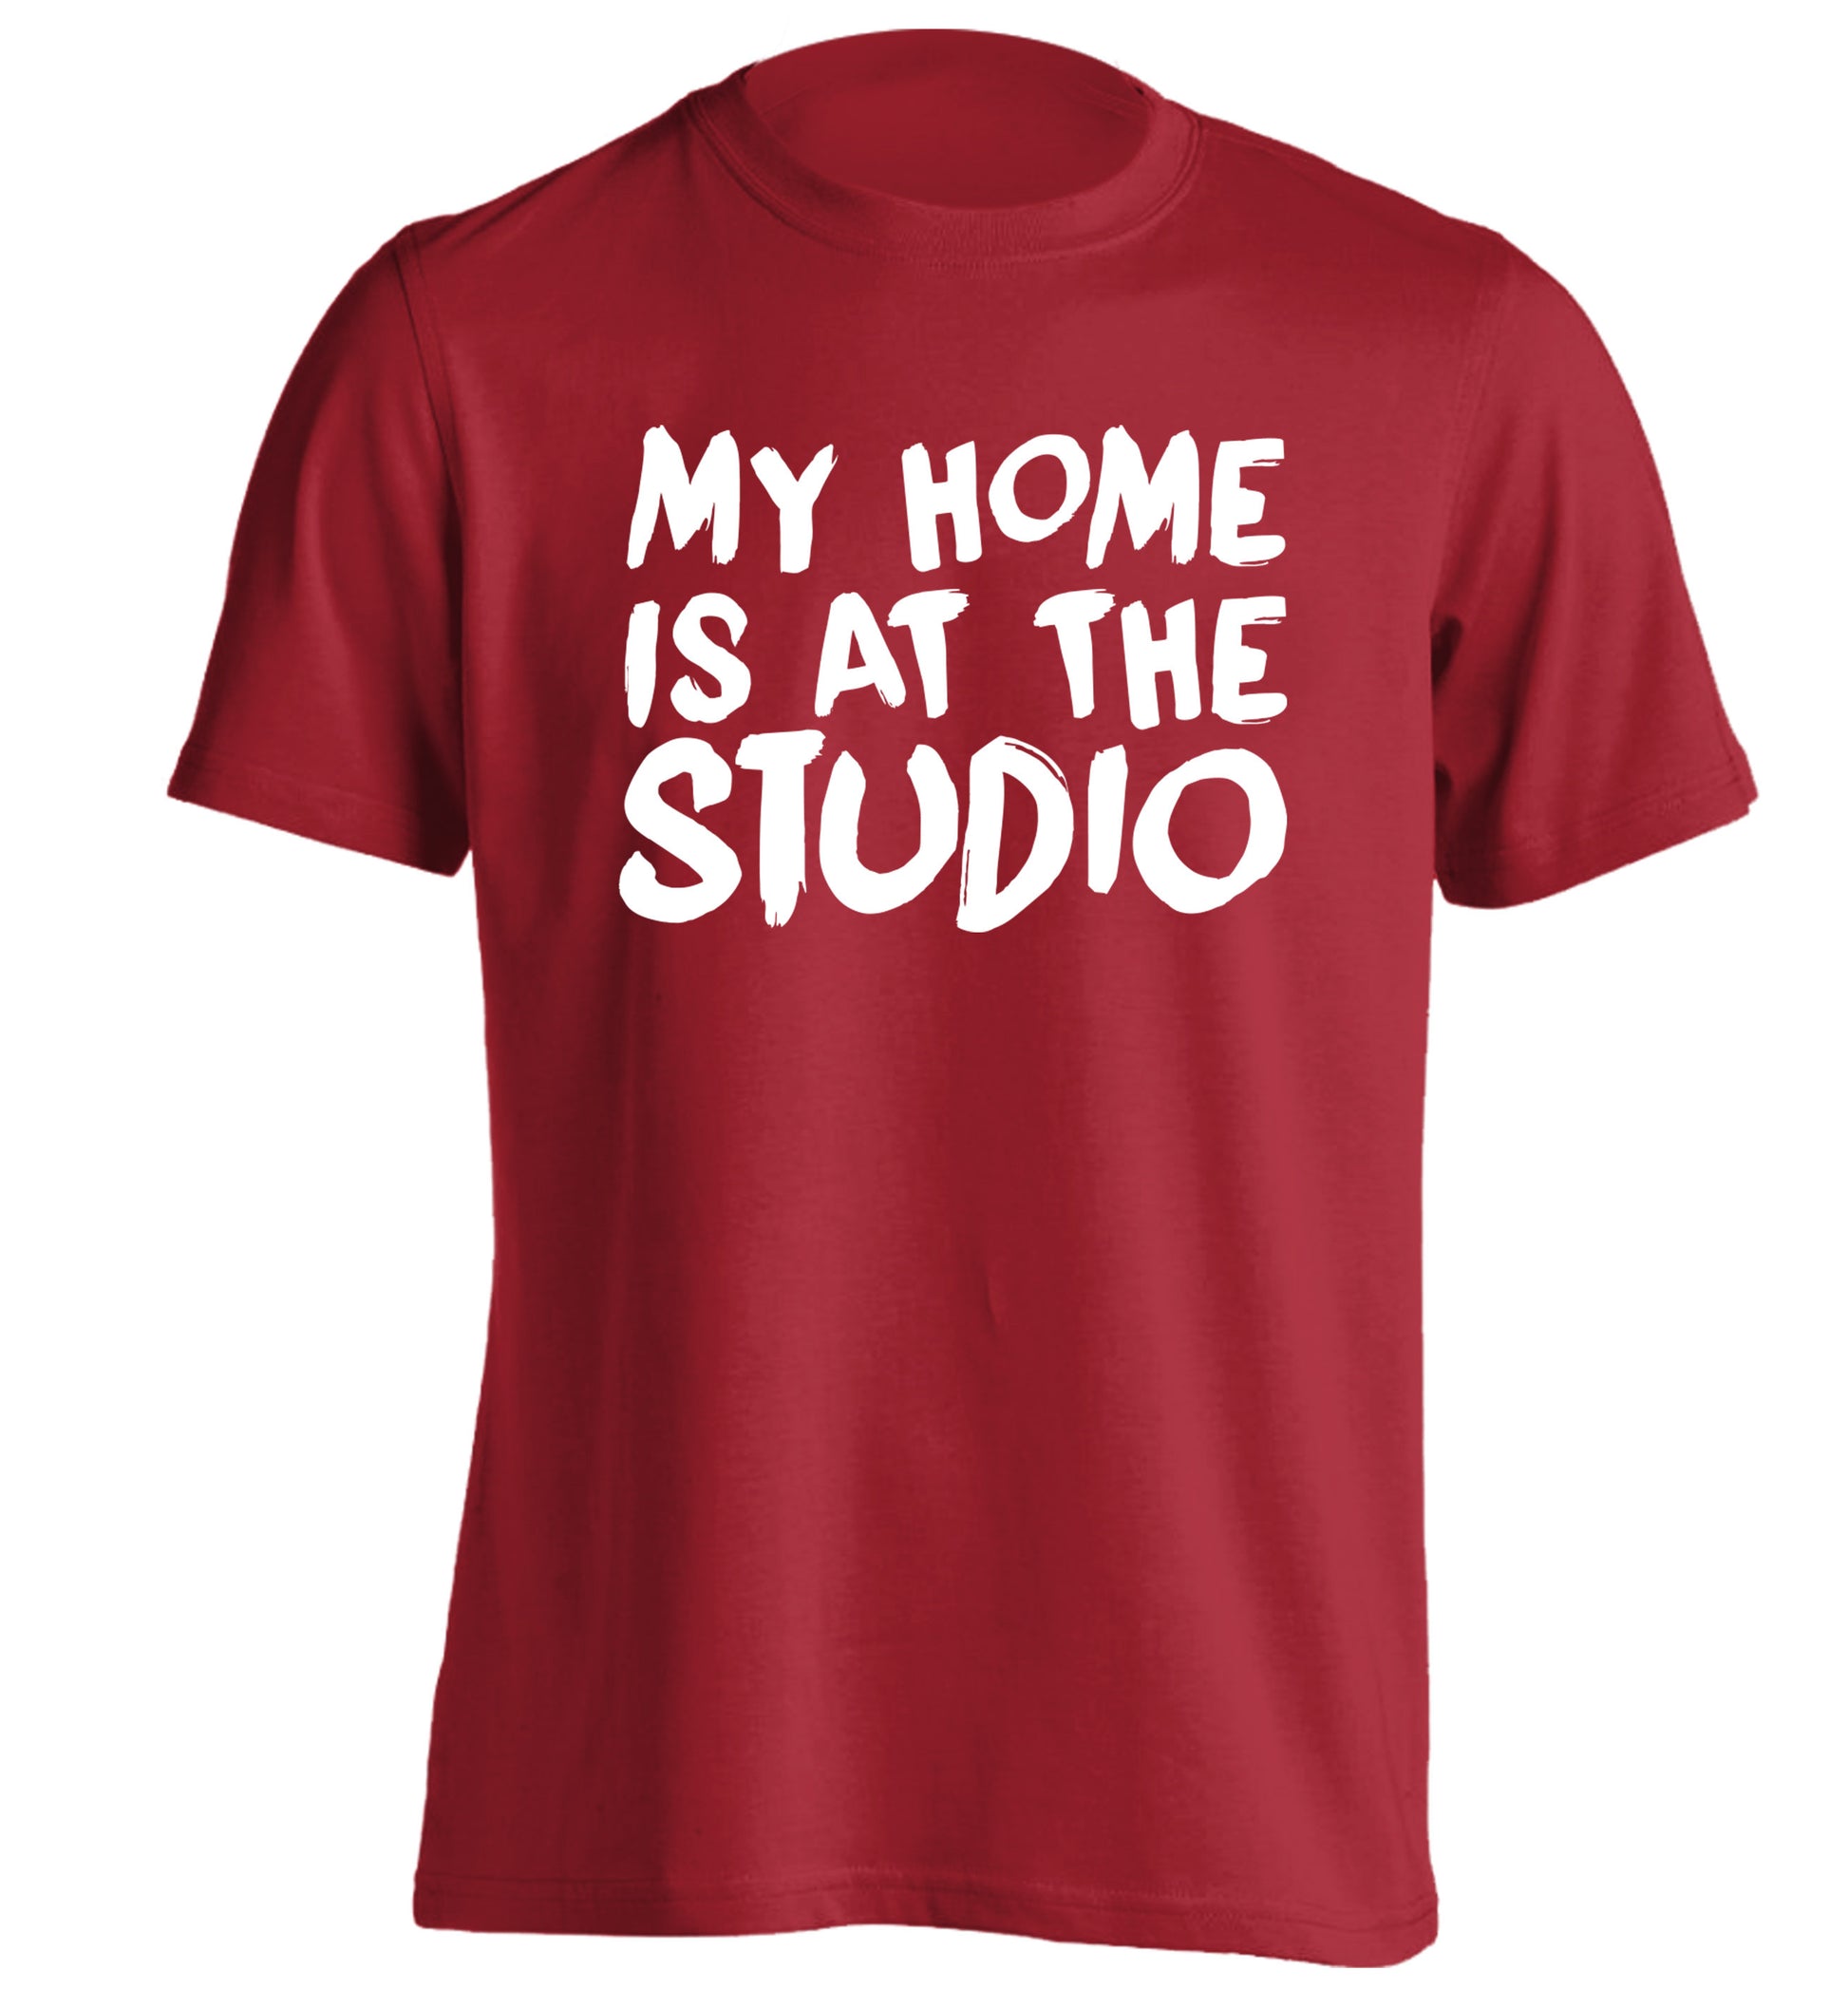 My home is at the studio adults unisex red Tshirt 2XL